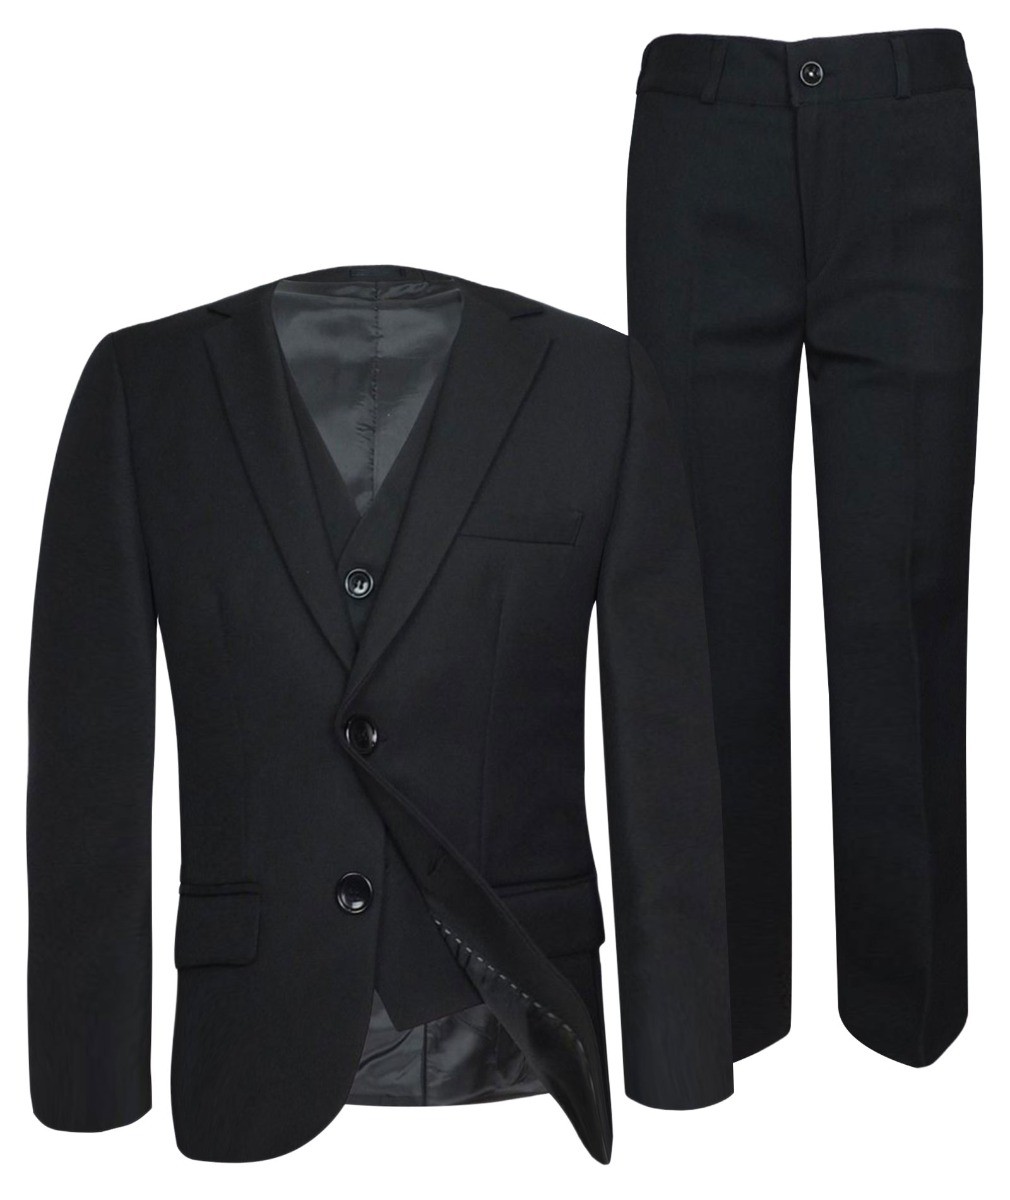 Boys Tailored Fit Formal Suit - Black